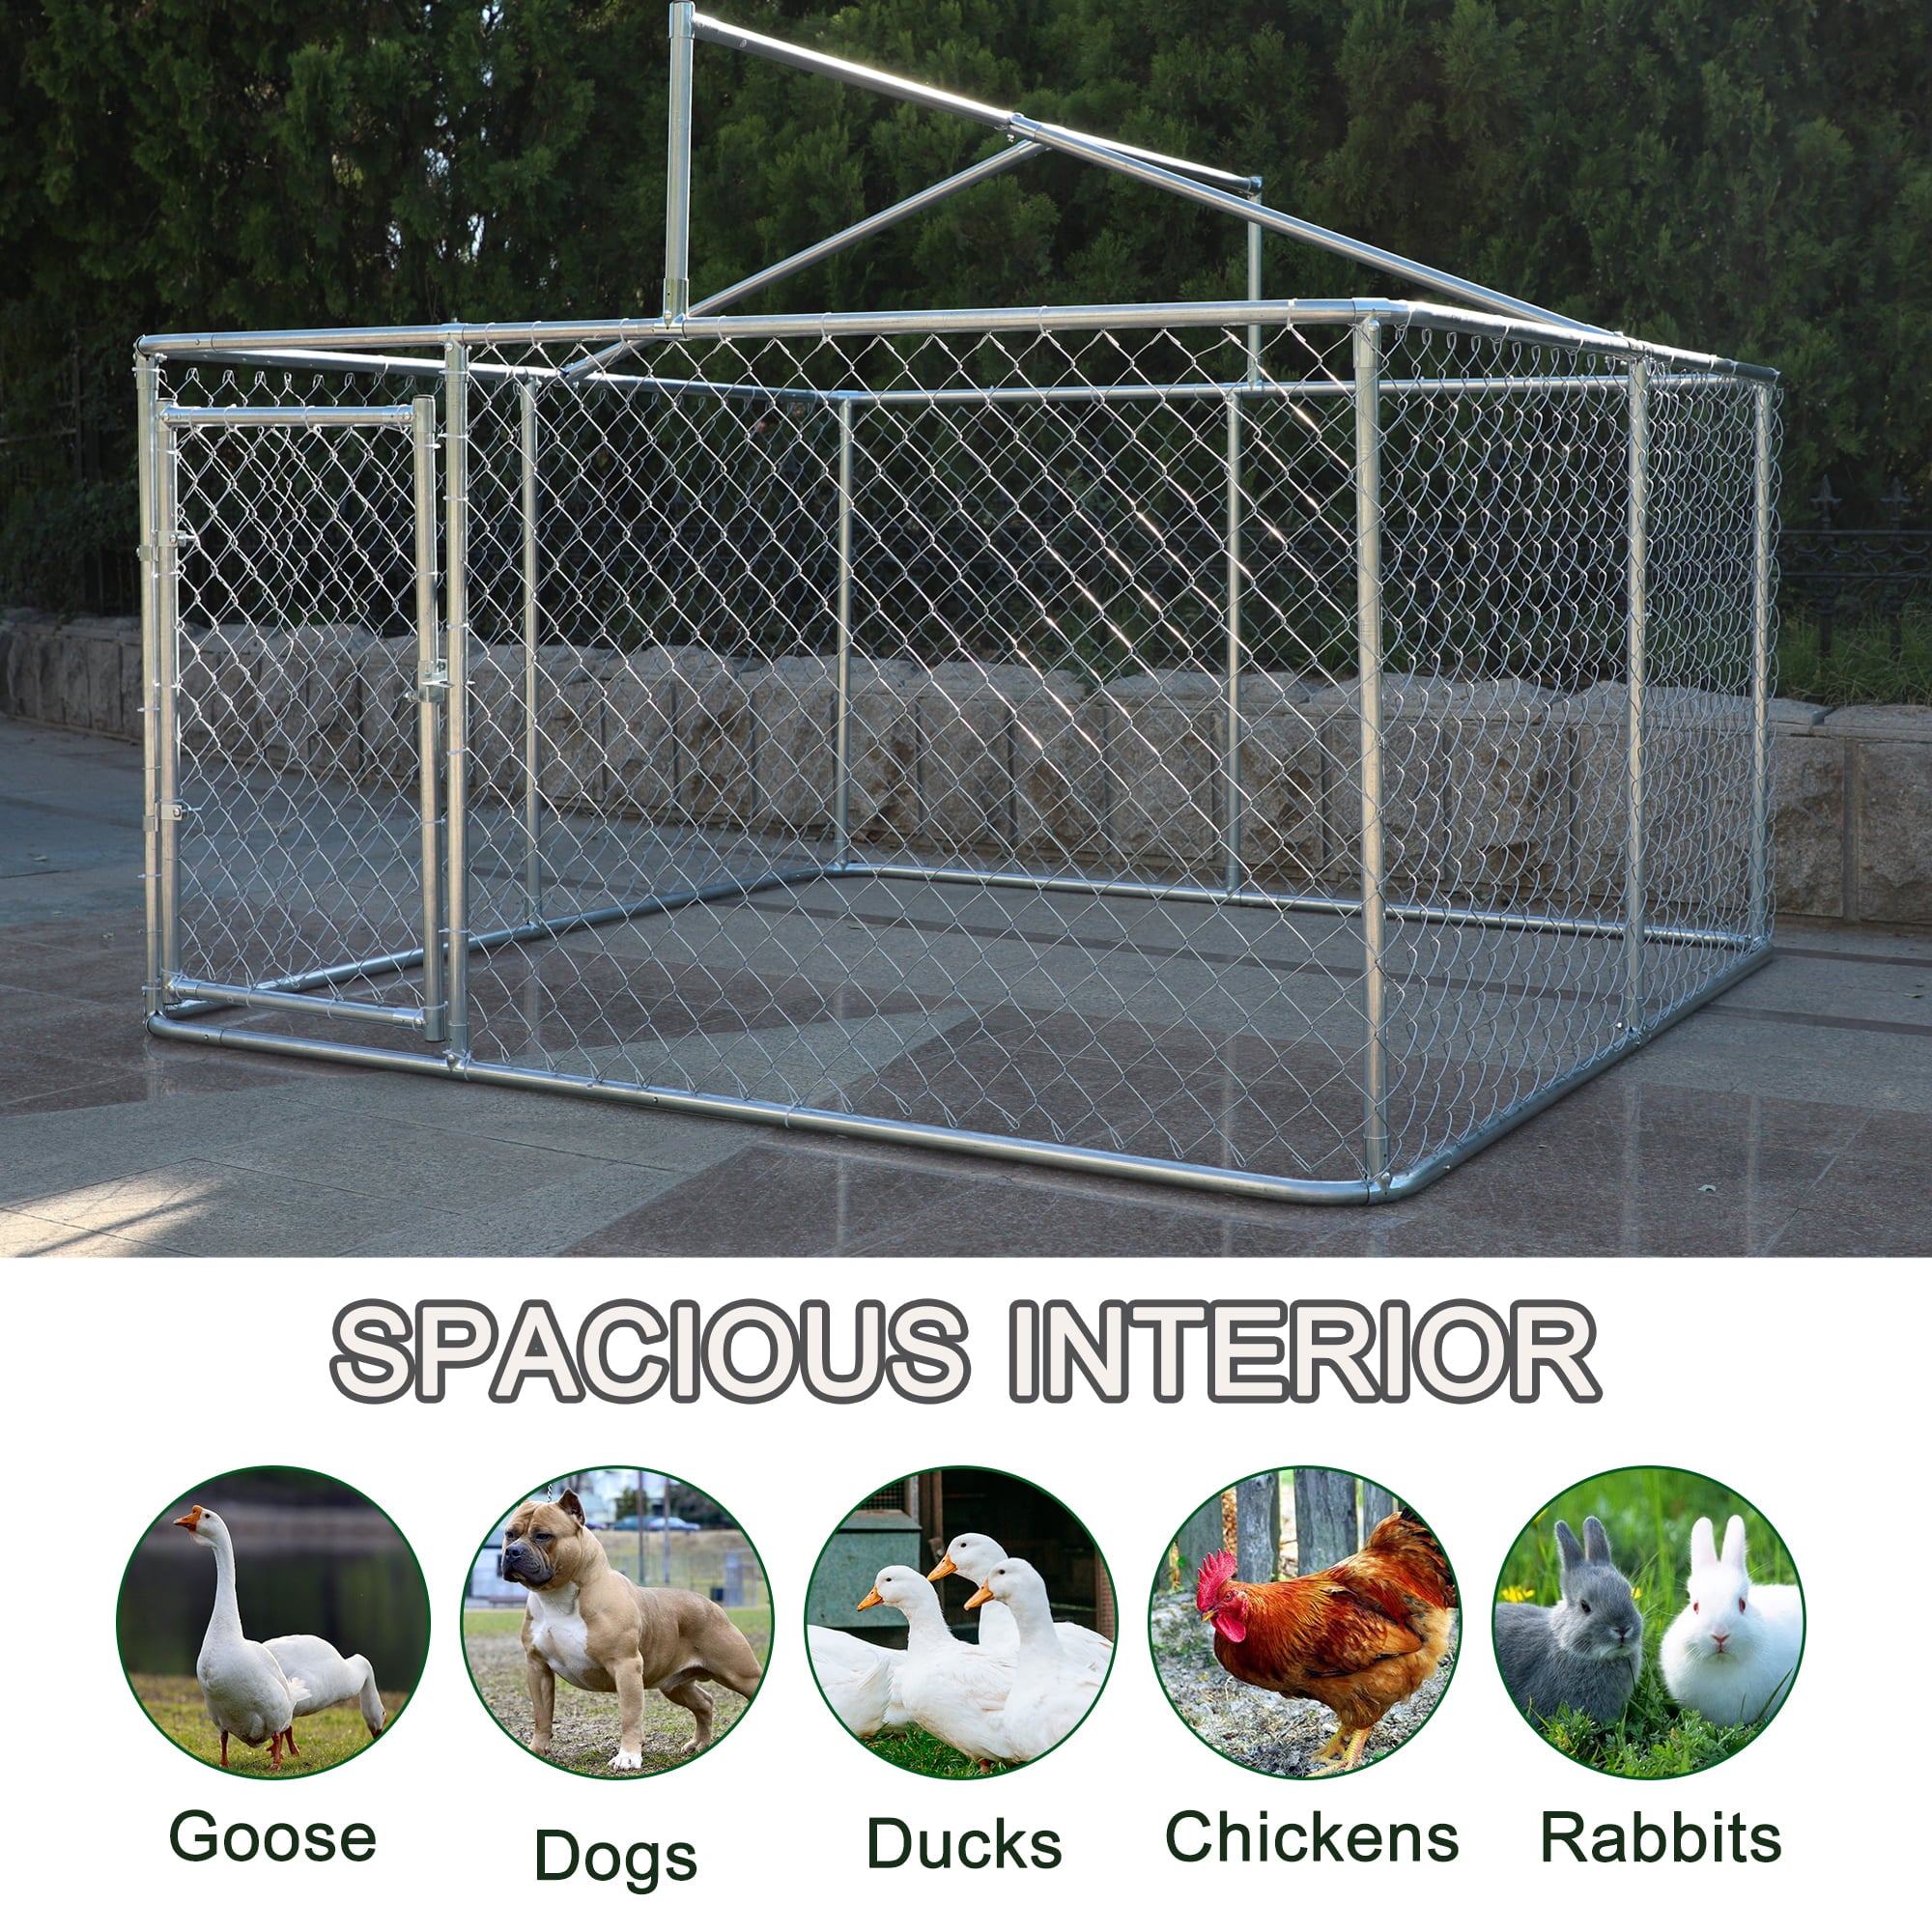 LZBEITEM 7.5 x 7.5ft Large Outdoor Dog Run Kennel， Heavy Duty Dog Cage Galvanized Steel Dog Fence Dog Enclosure Playpen with Waterproof Cover